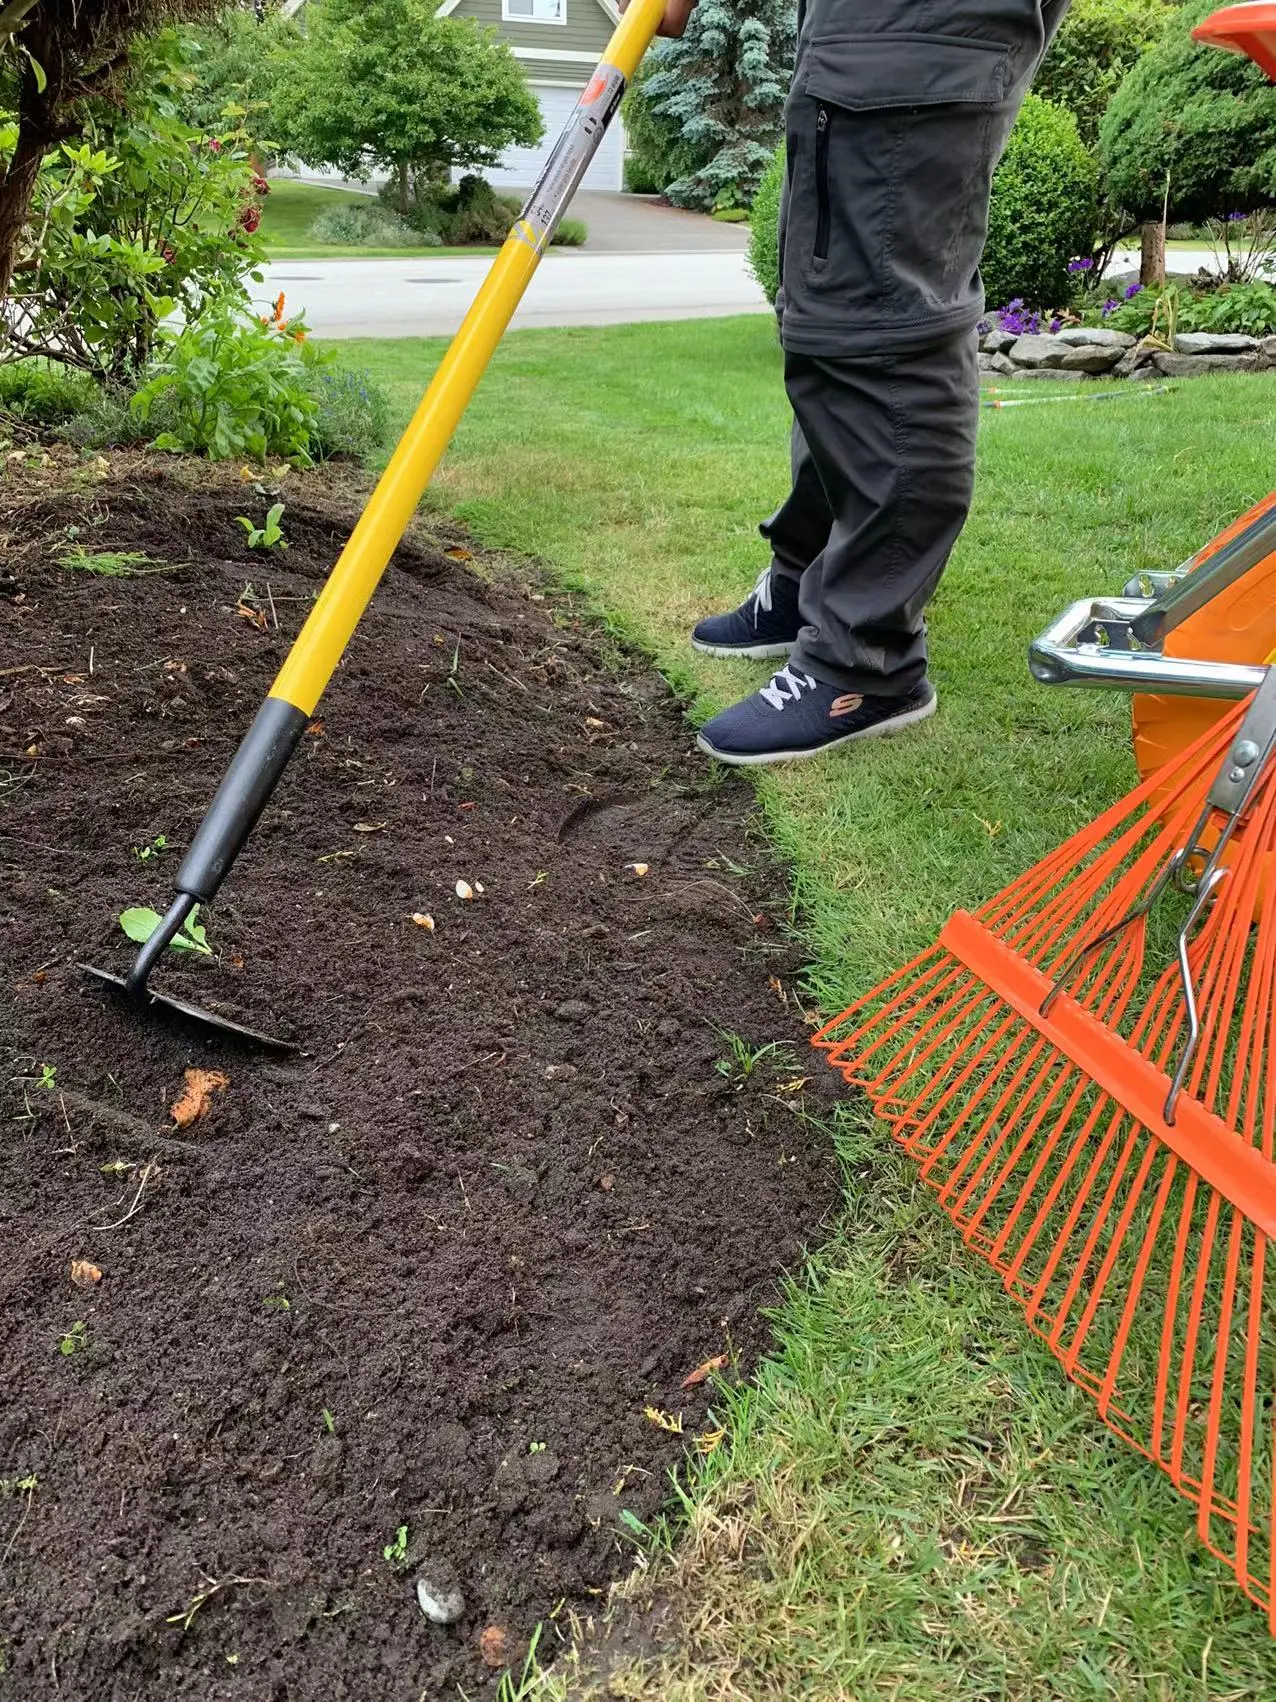 Maintenance and Care Tips for Long-Handled Garden Tools